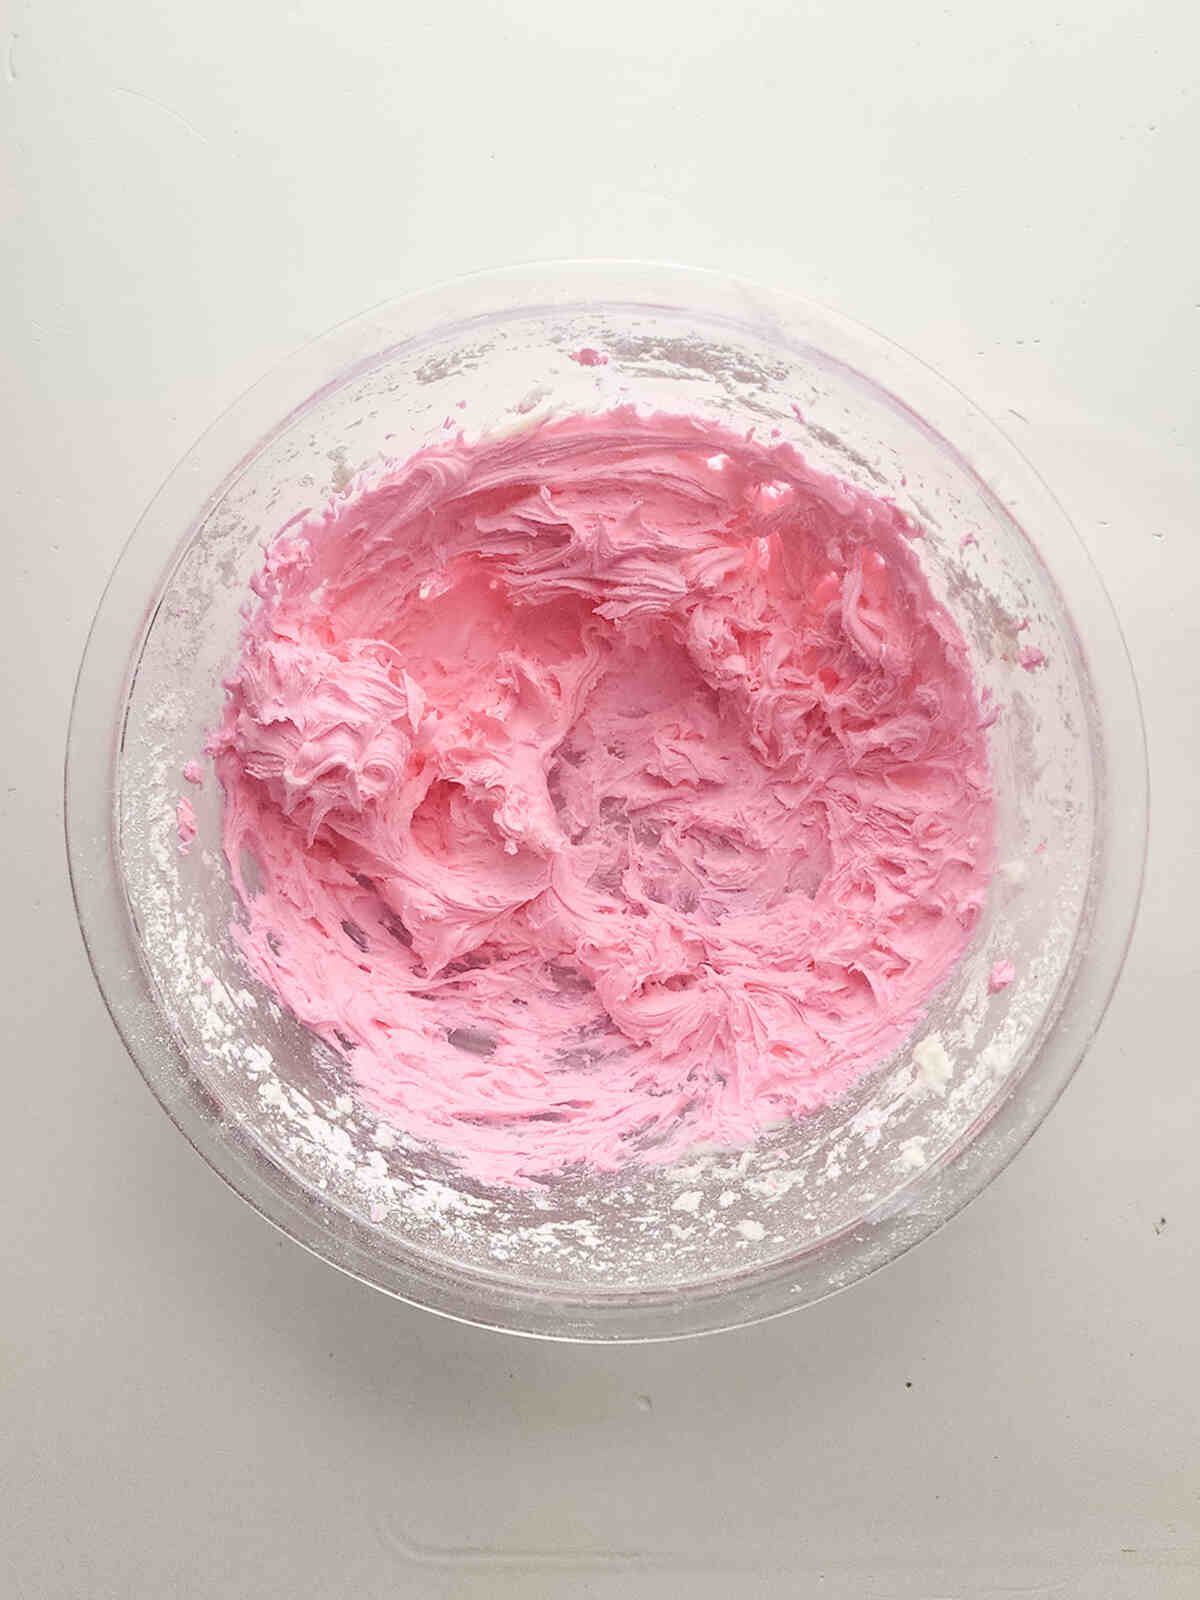 Pink frosting mixture in a mixing bowl.